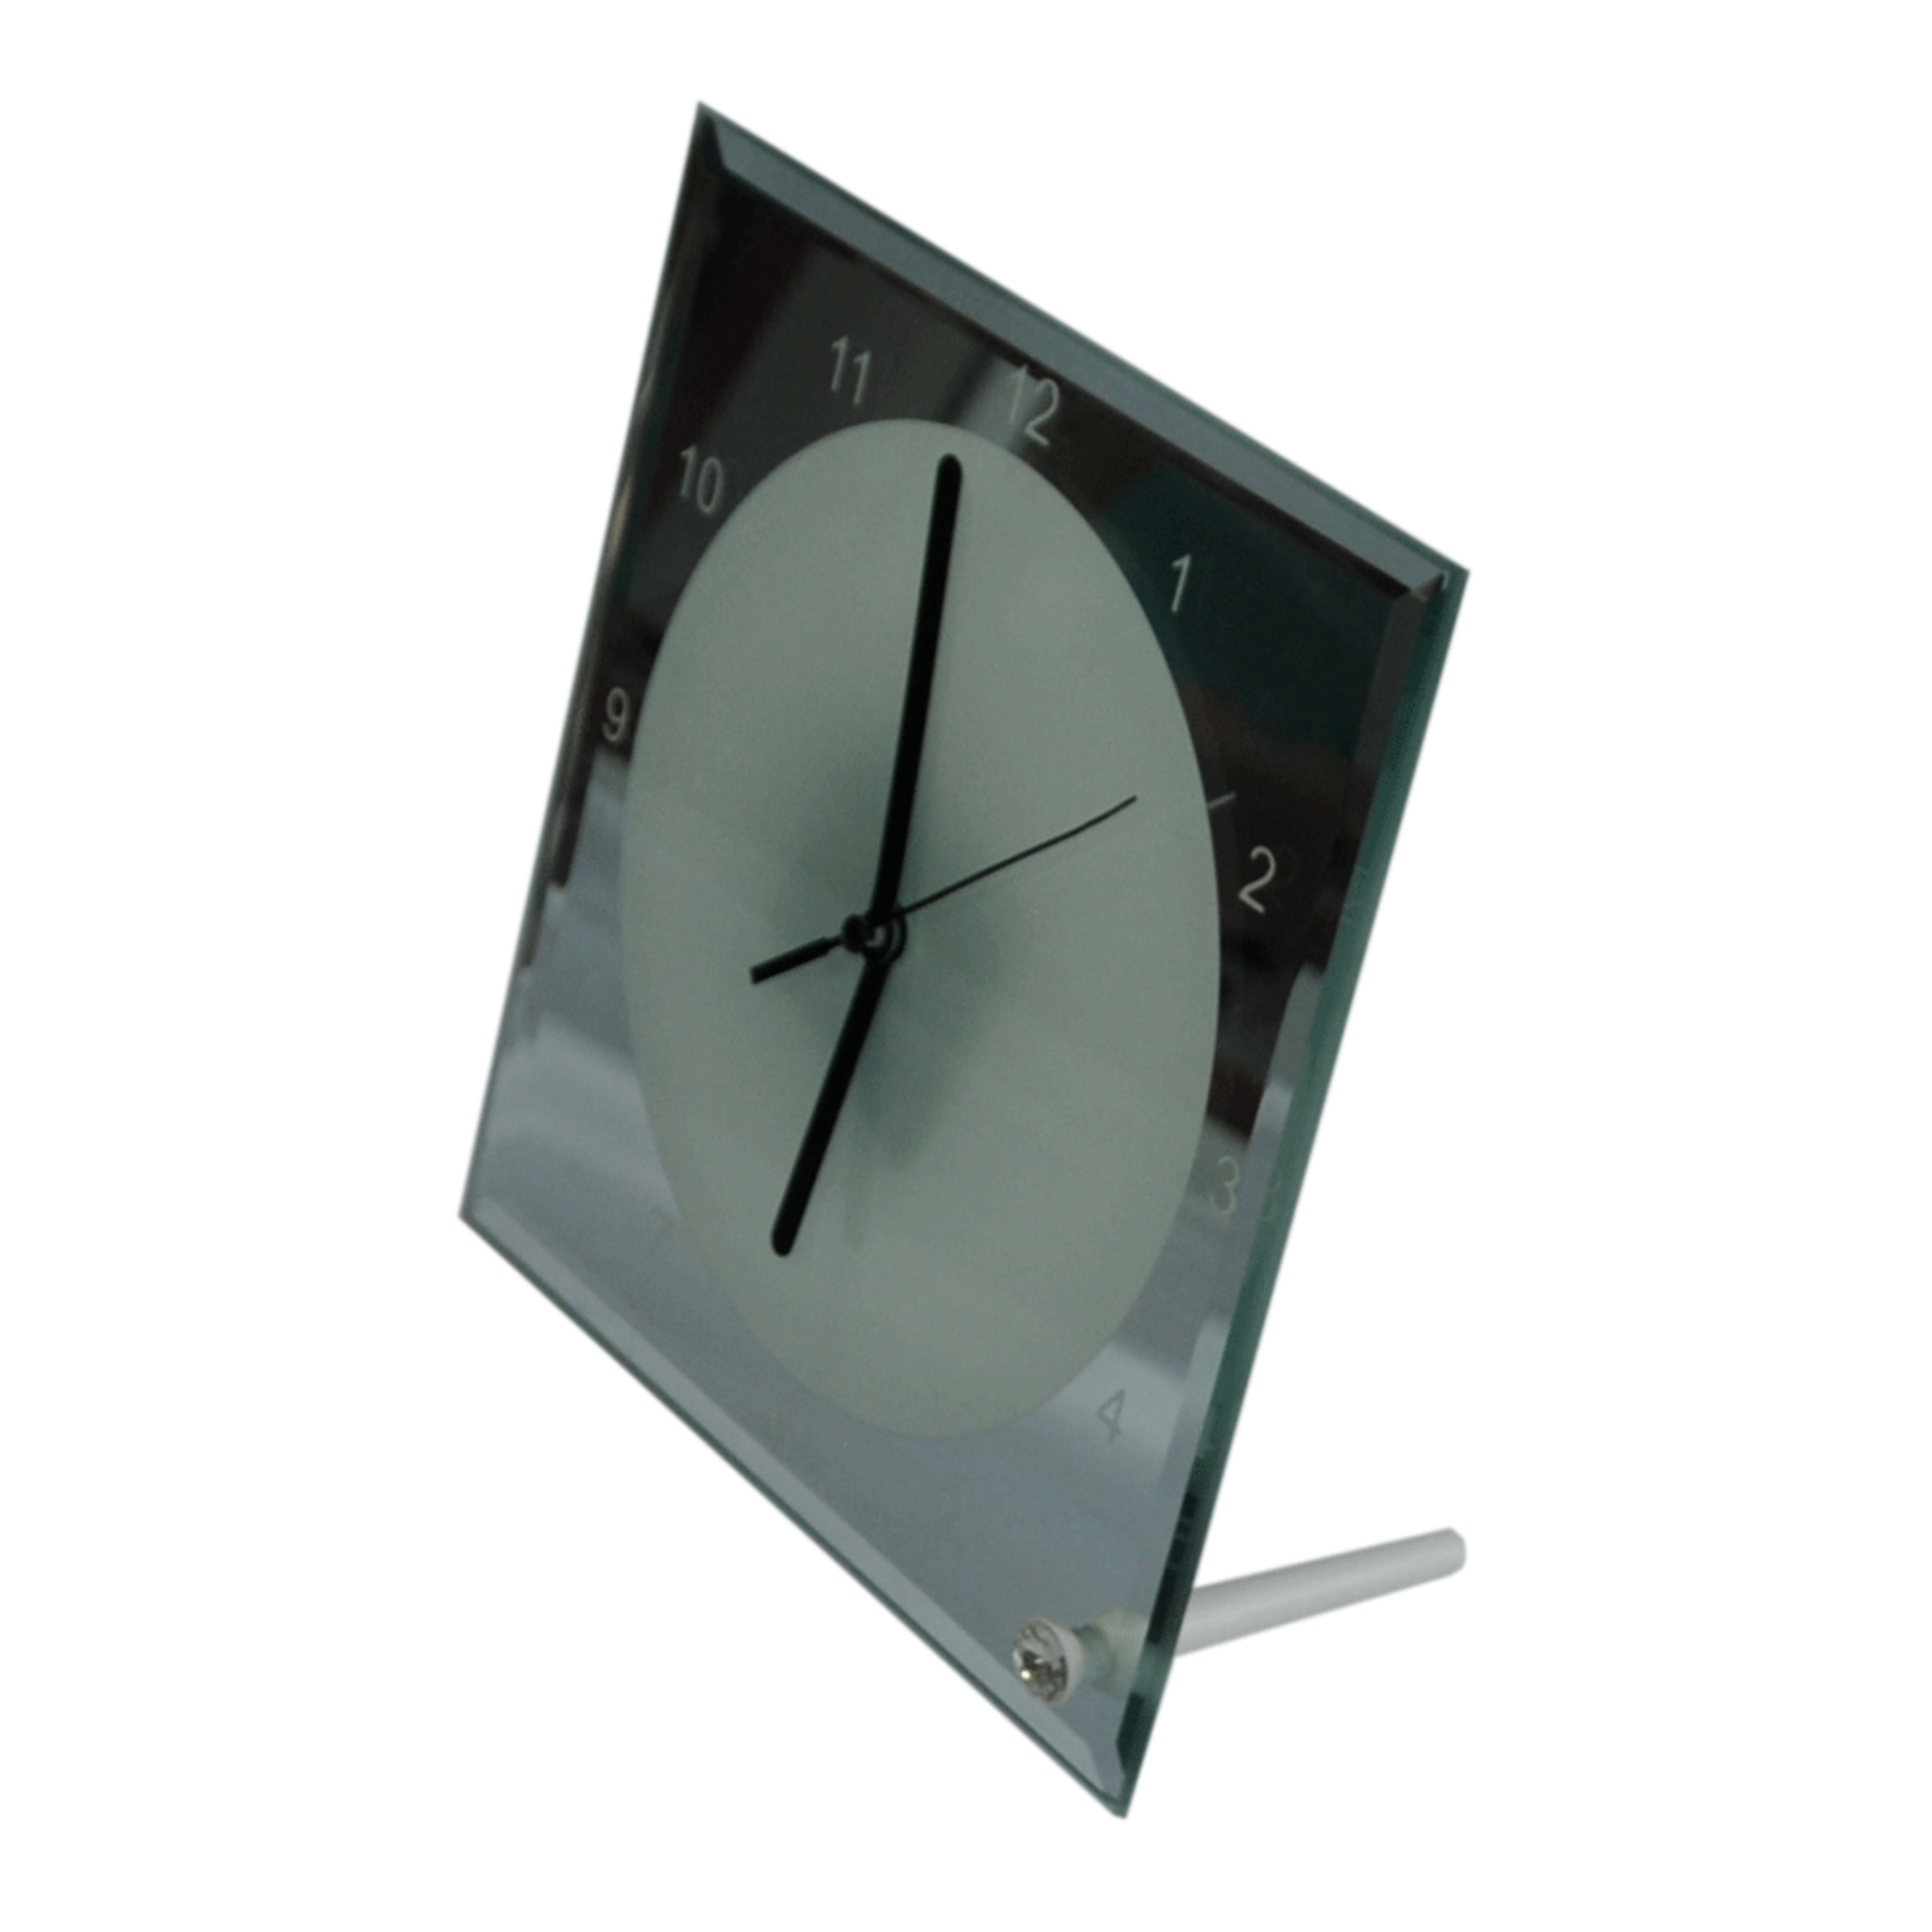 7.8" x 7.8" Sublimation Blank Mirror Edge Glass Photo Frame with Clock